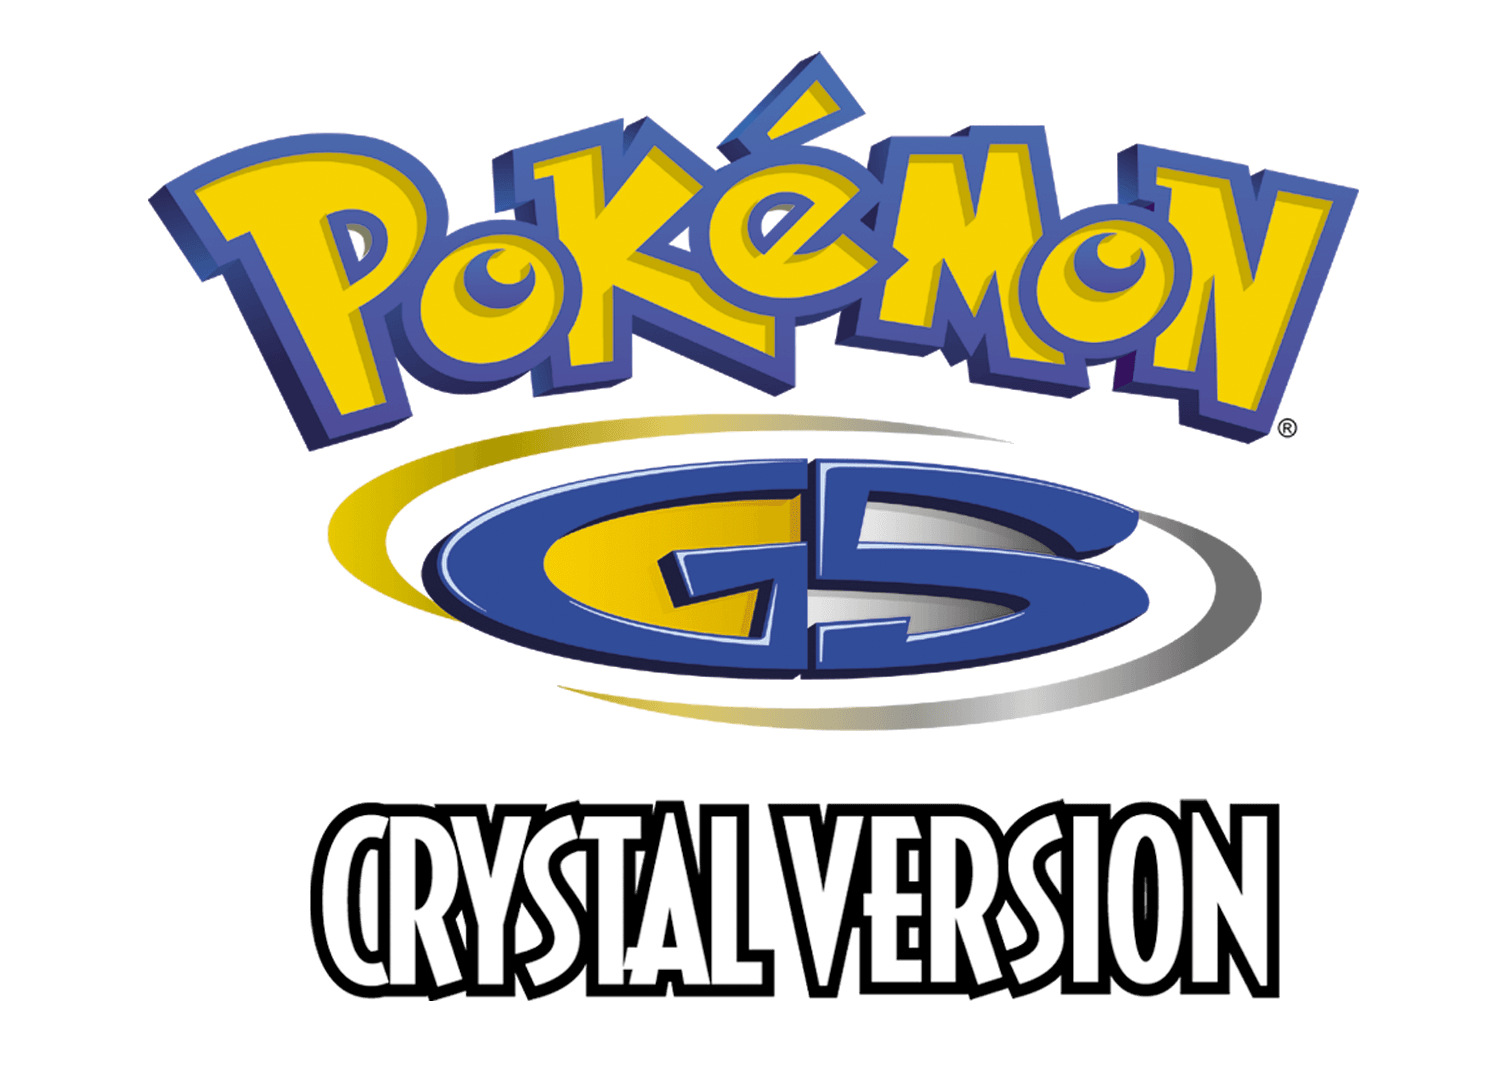 Pokémon Gold, Silver, and Crystal information added to the game